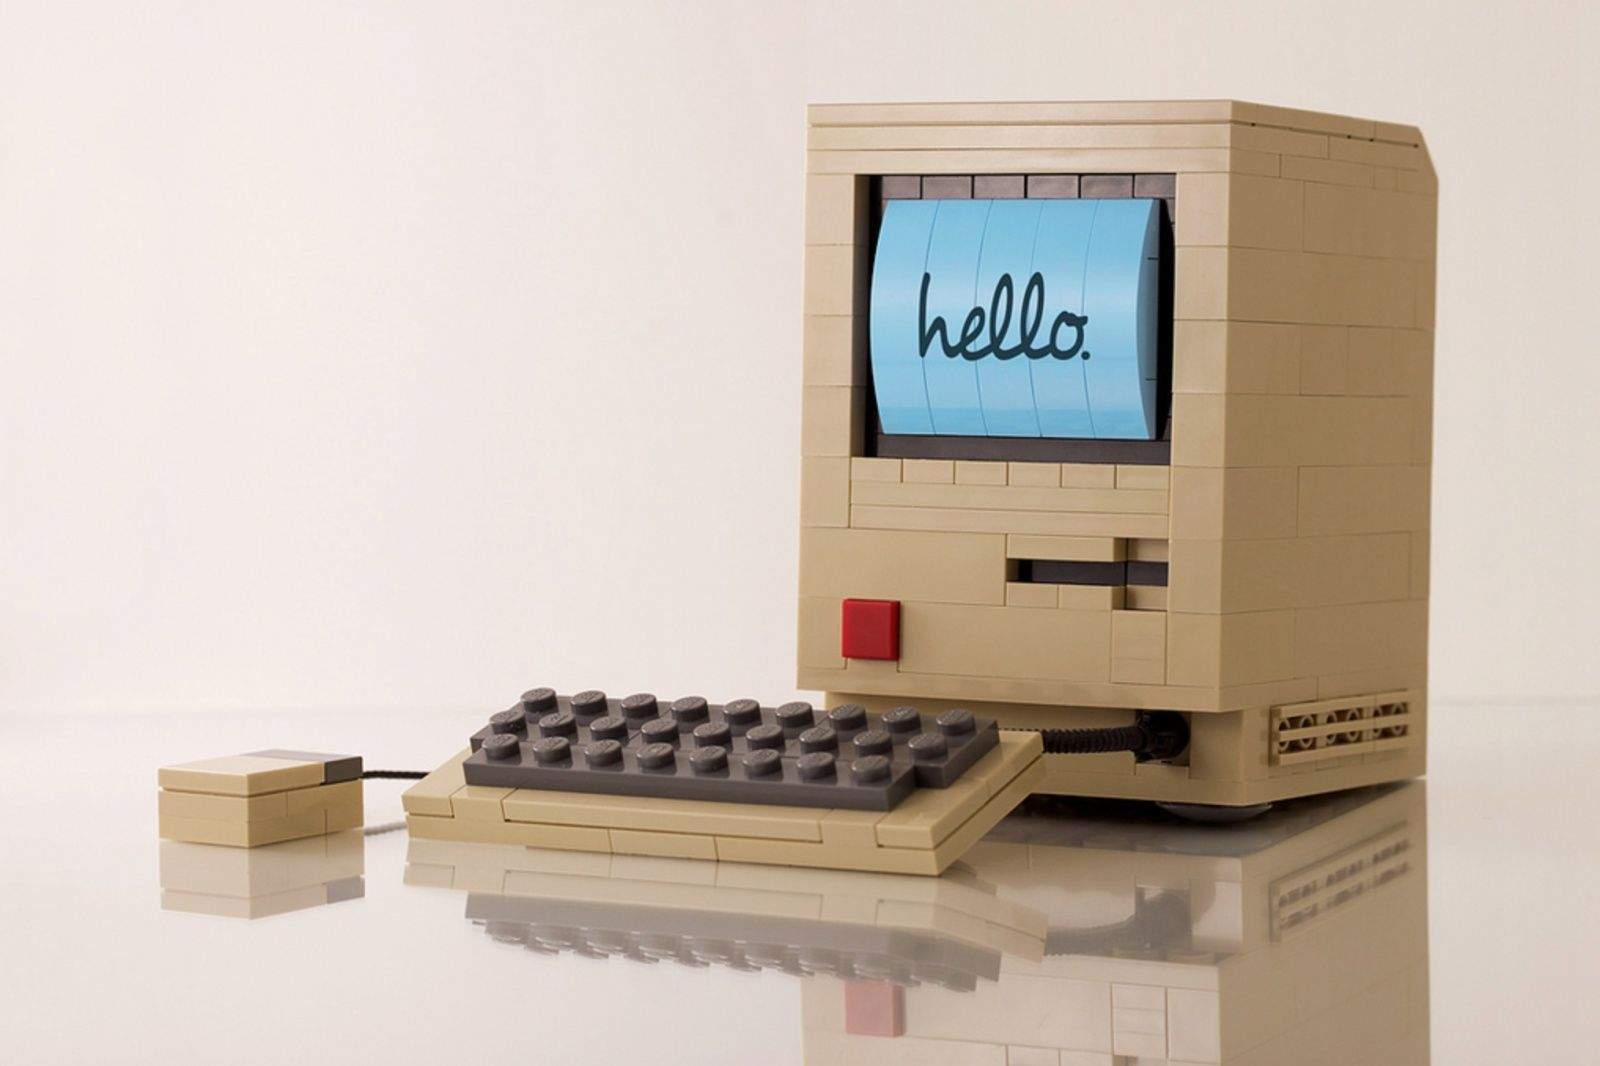 A Lego Mac might be the perfect gift for the Apple fan in your life. Photo: Chris McVeigh.